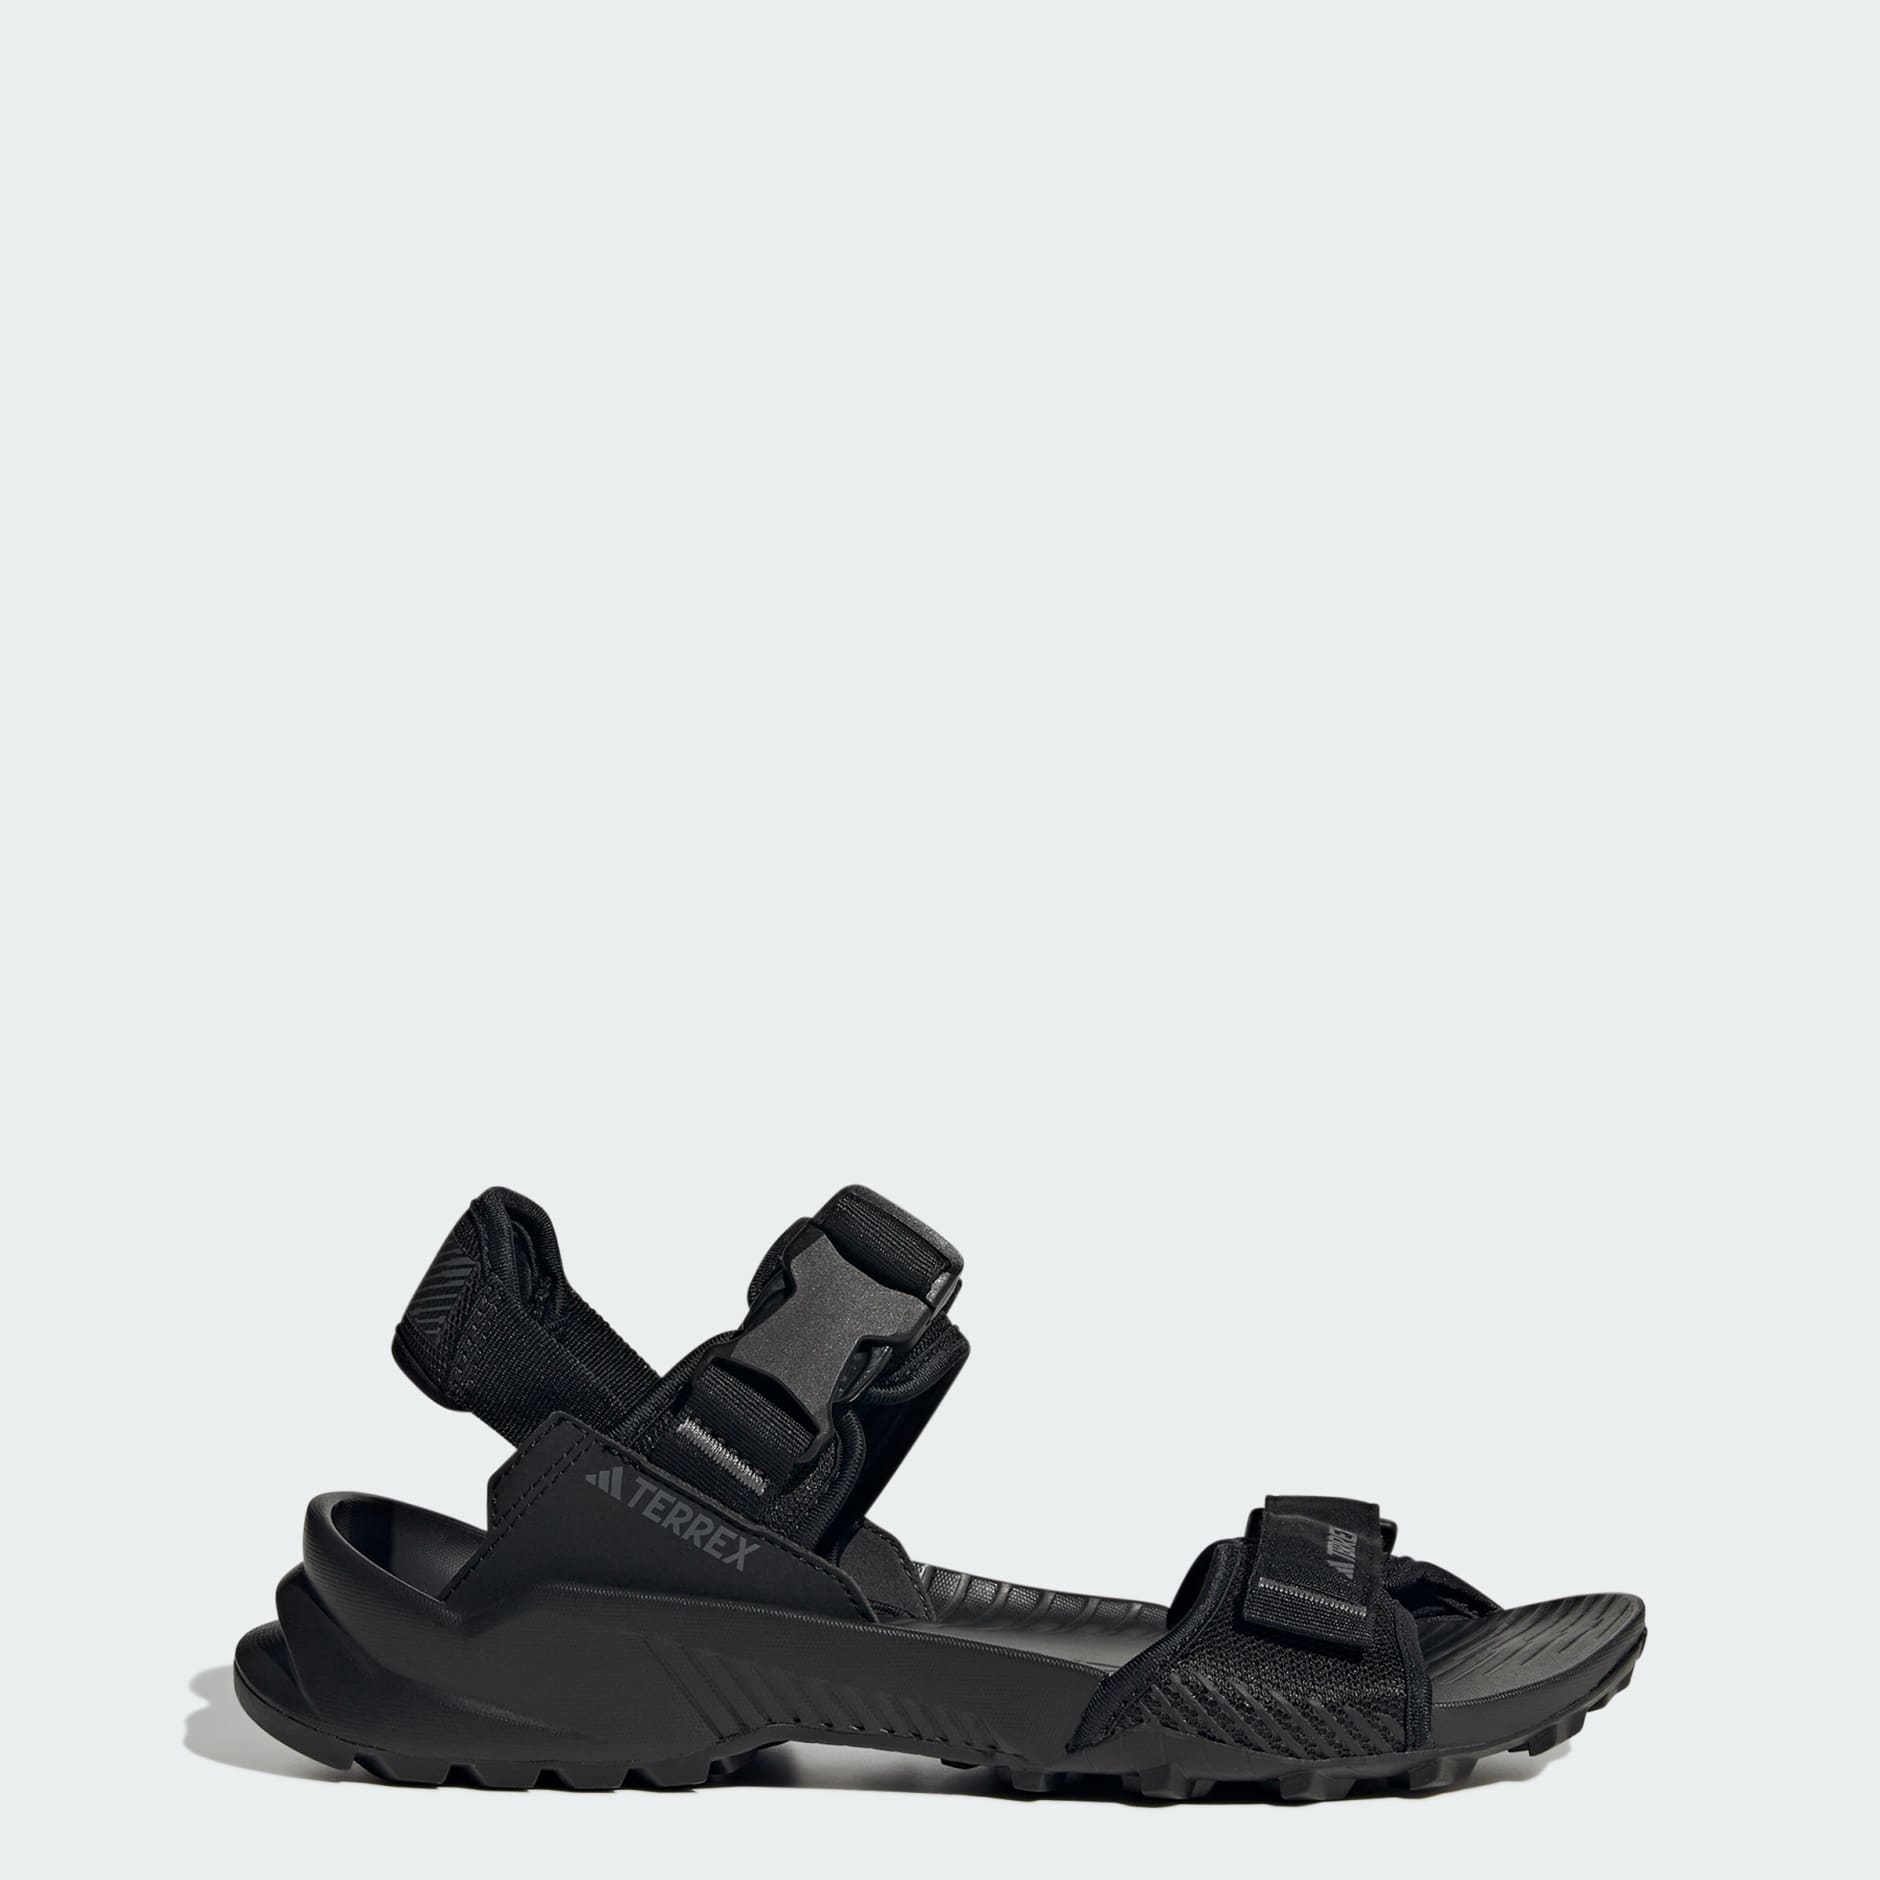 Adidas Sandals for Everyday Wear